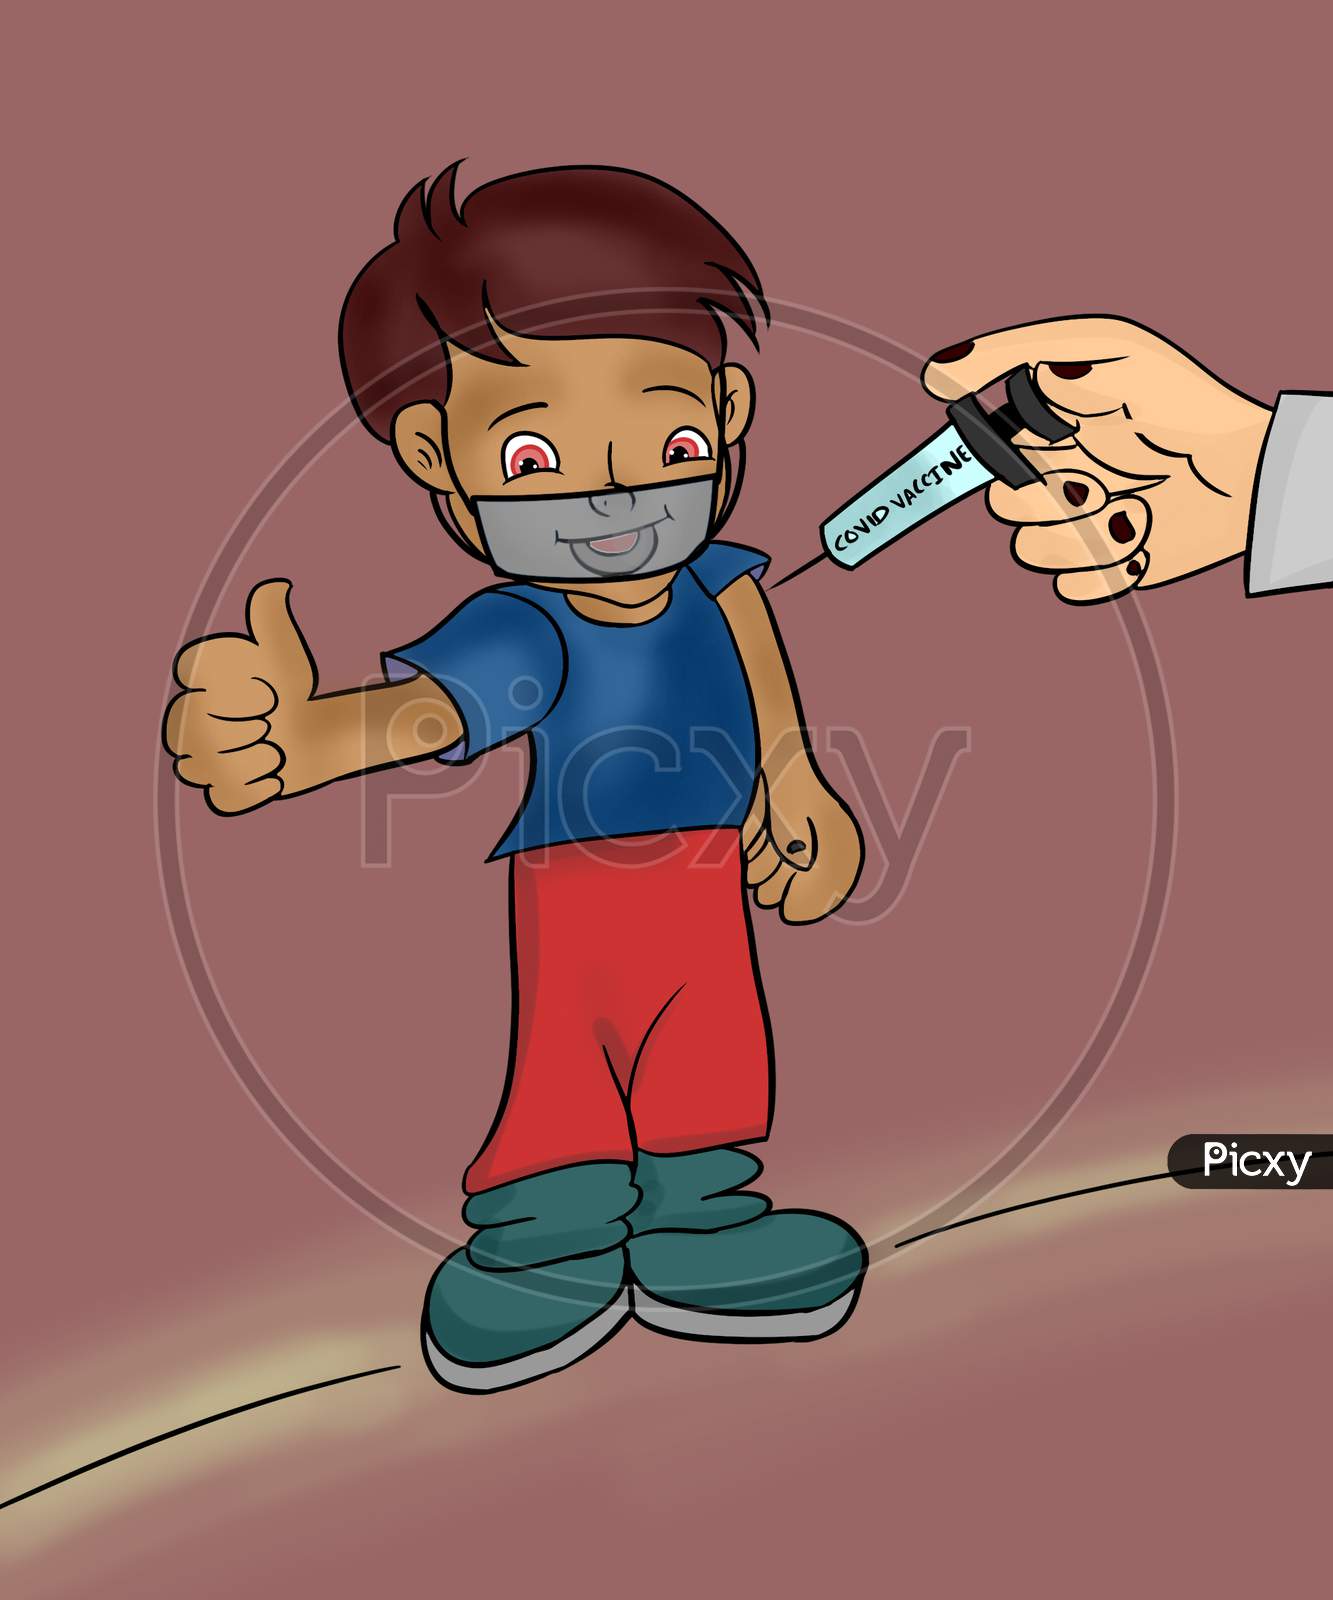 Happy Smiling Kid With Face Mask Getting Vaccinated And Showing Thumbs Up Gesture - Concept Of Childrens Coronavirus Covid 19 Vaccine Recommendation.